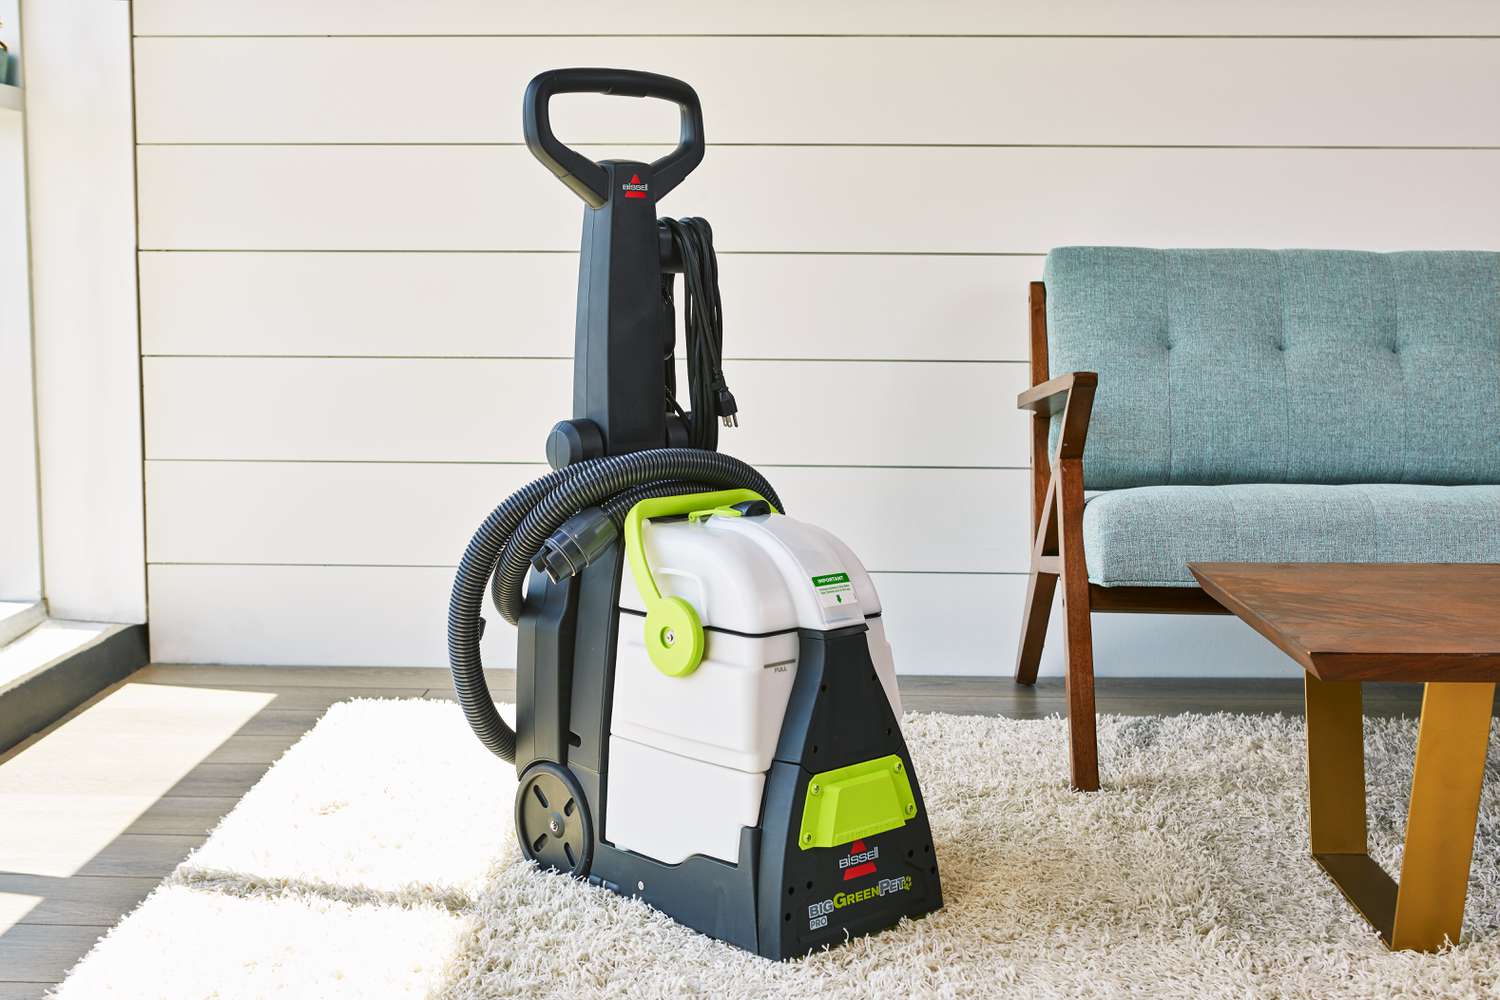 Bissell Big Green Pet Pro Carpet Cleaner displayed next to a couch and coffee table